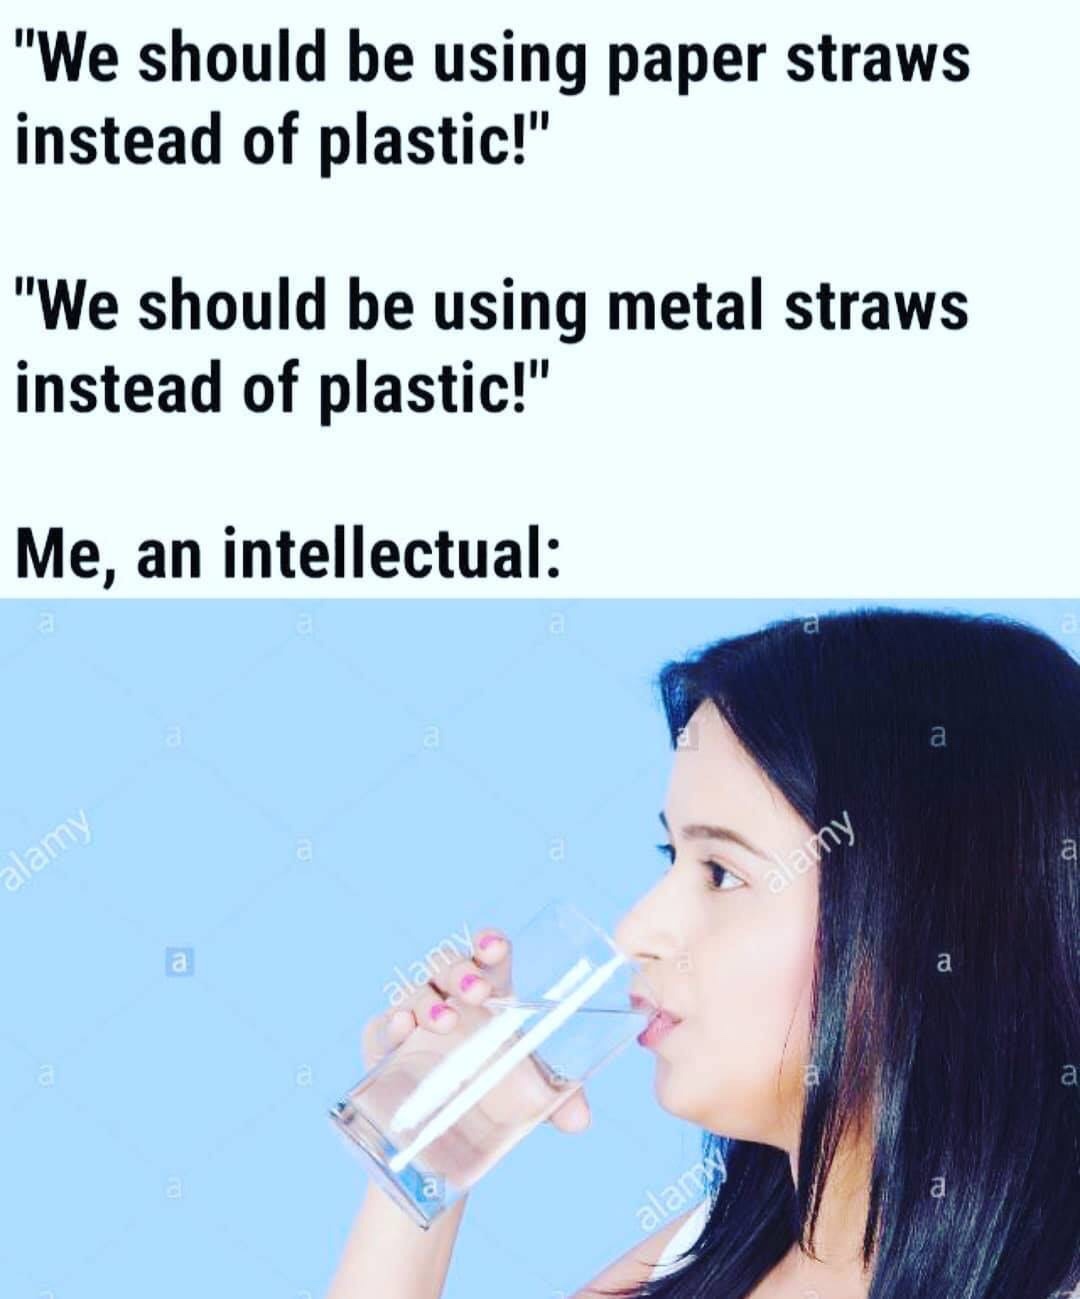 water - "We should be using paper straws instead of plastic!" "We should be using metal straws instead of plastic!" Me, an intellectual alamy Calamy alan